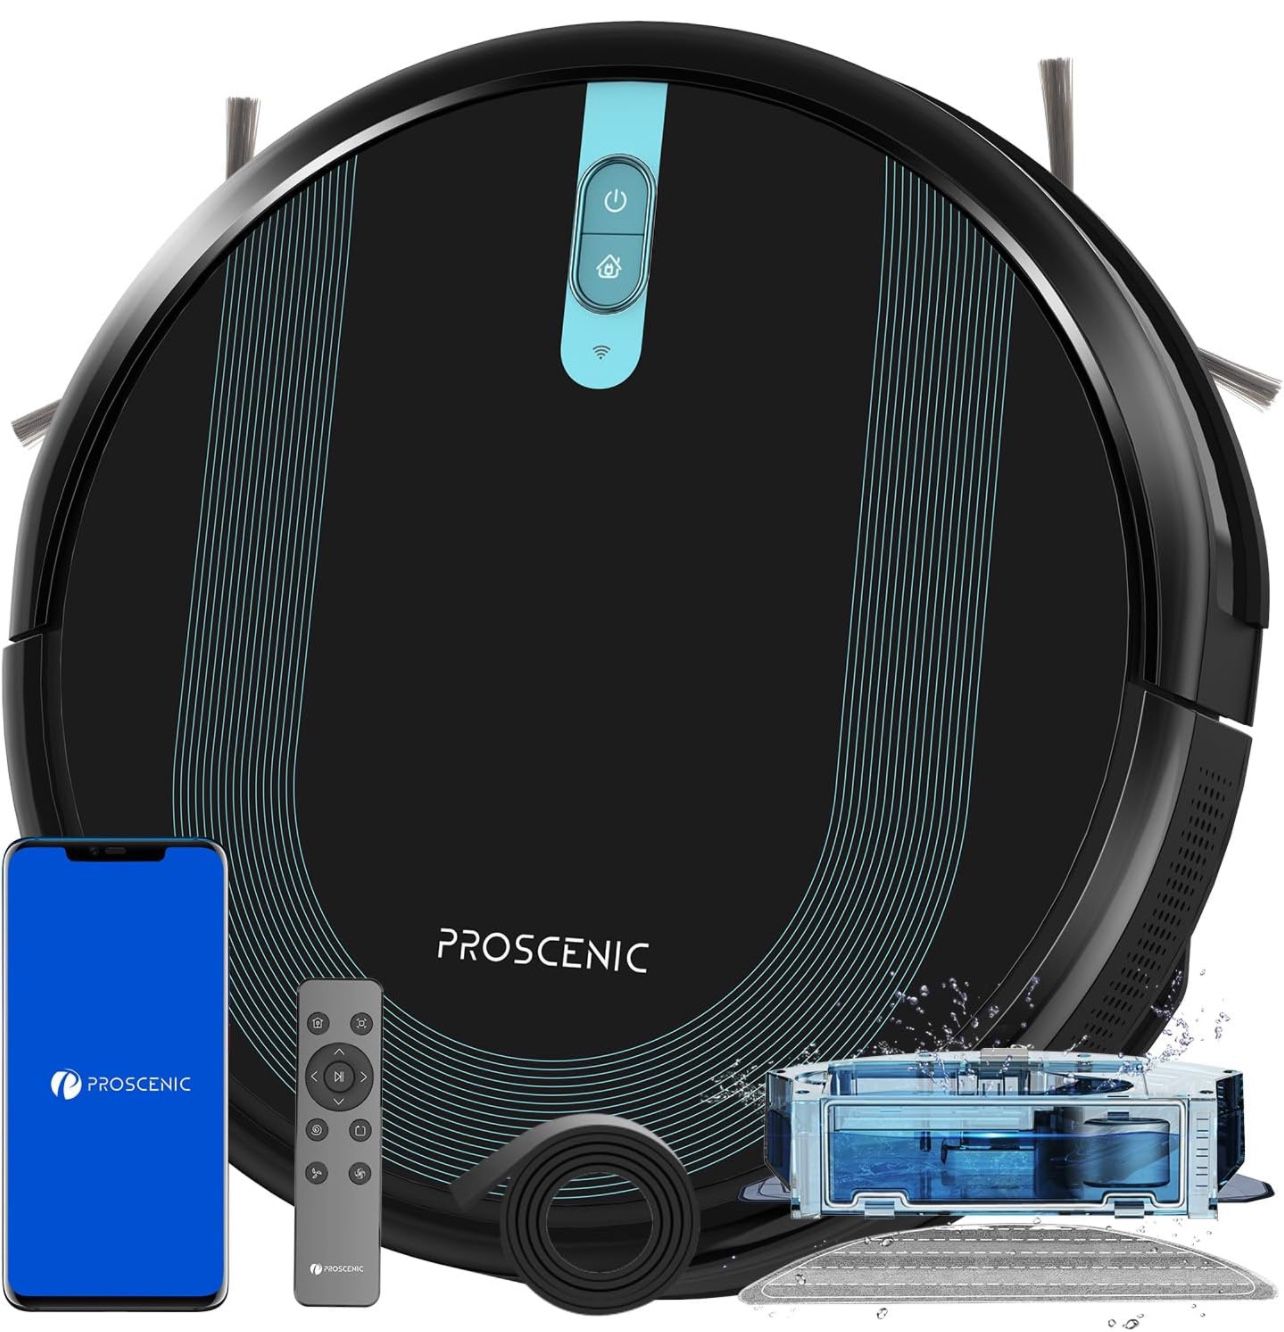 Proscenic 850T WiFi Robot Vacuum and Mop with Gyro Navigation, Boundary Strip, Self-Charging - for H